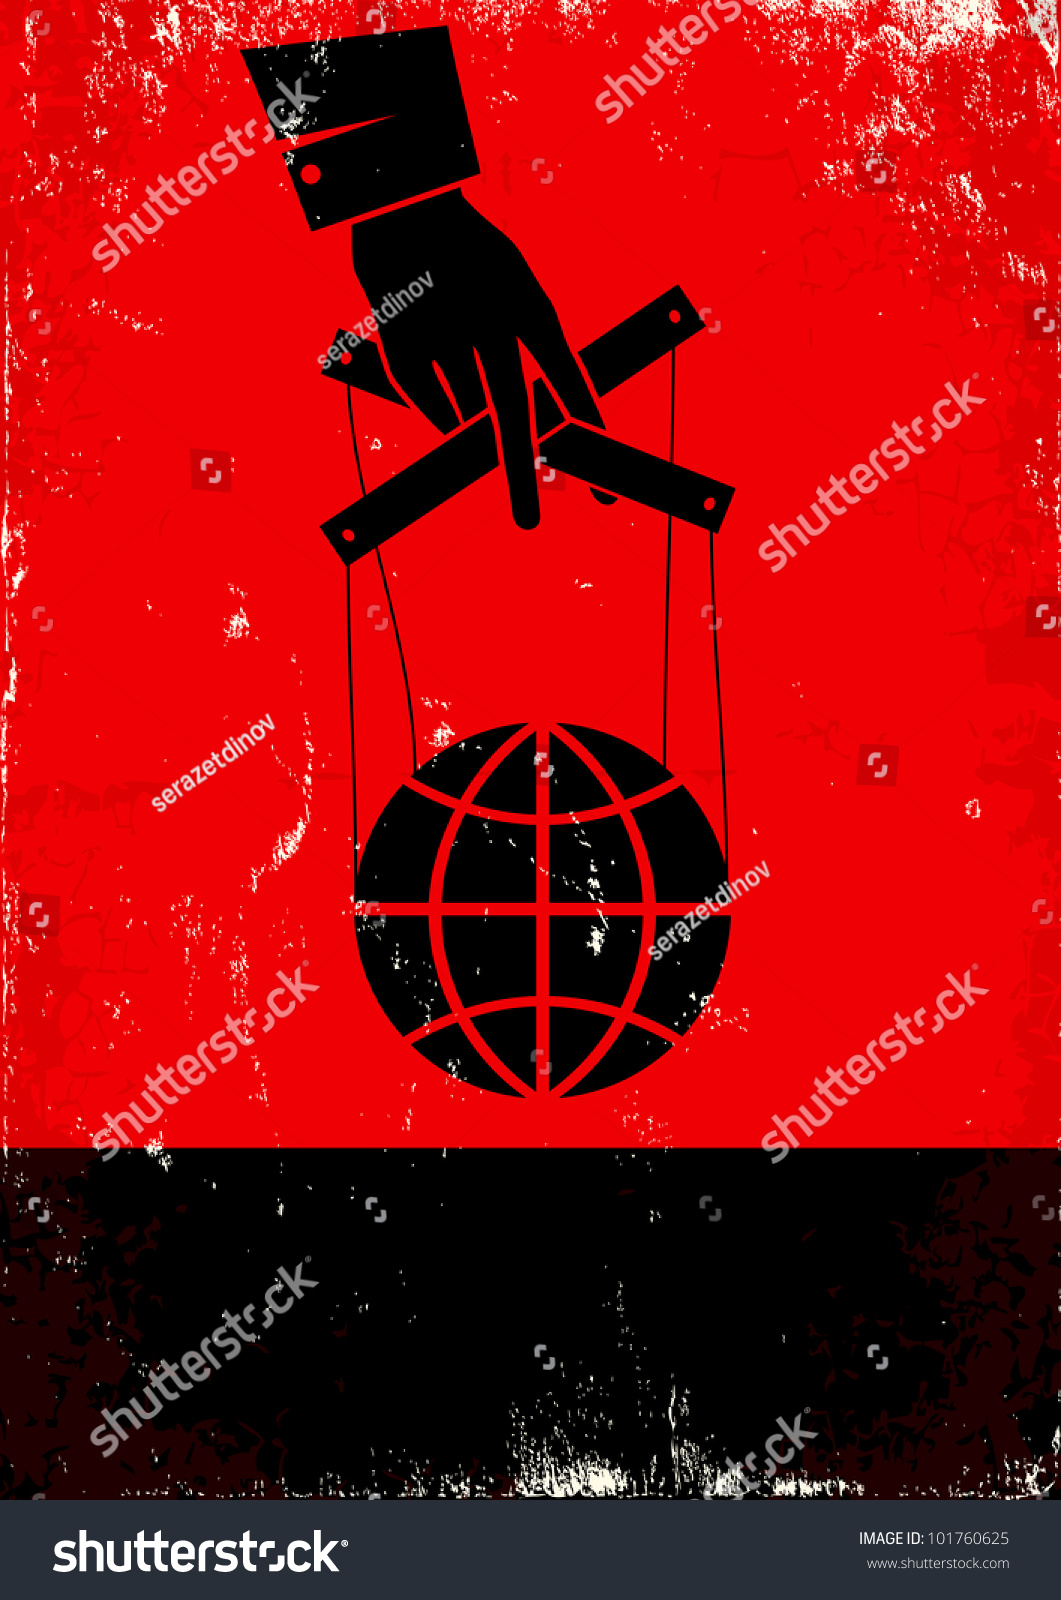 Red and black poster with hand and globe #101760625